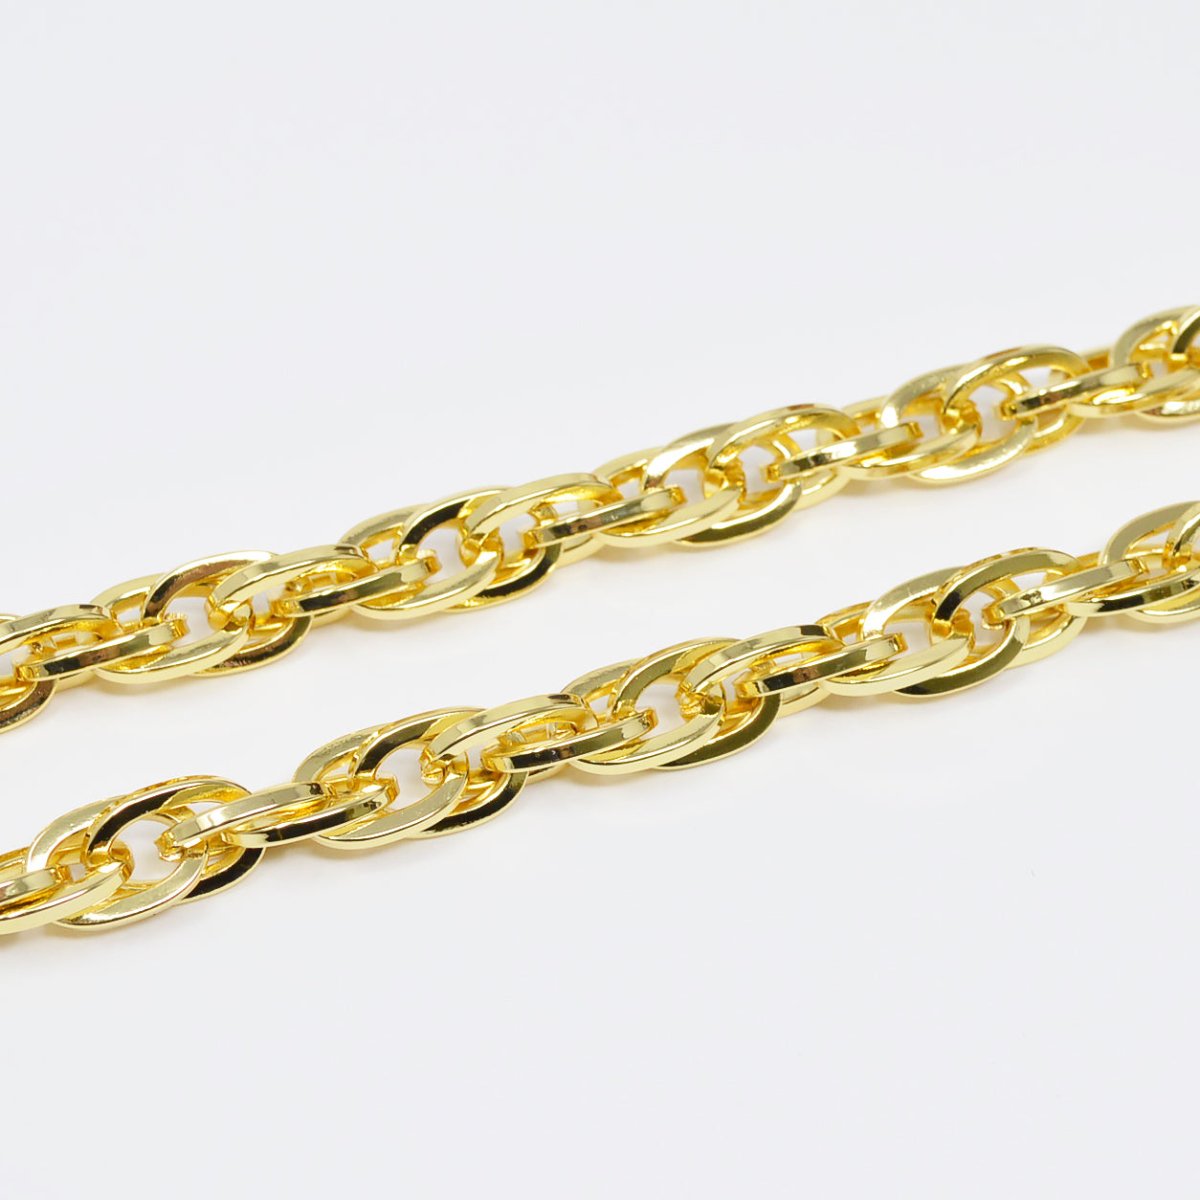 Bold Rope Open Chain 24K Gold Filled by Yard, Double Oval Link Chain, Yellow Gold Thick Rope for DIY Craft | ROLL-453 Clearance Pricing - DLUXCA